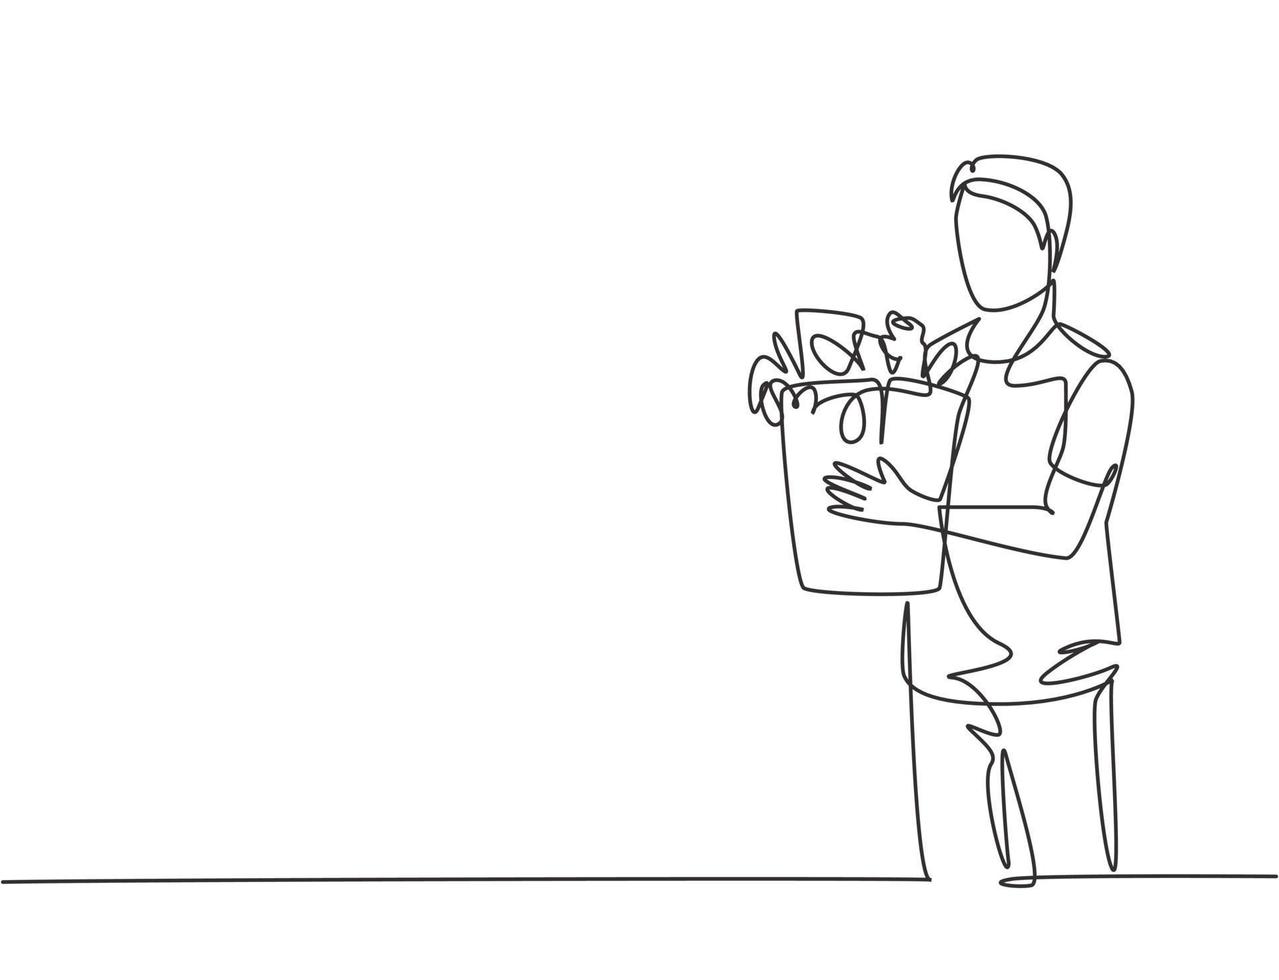 Single continuous line drawing young happy attractive man holding groceries bag full of daily needs. Buying organic product at grocery store concept. One line draw vector graphic design illustration